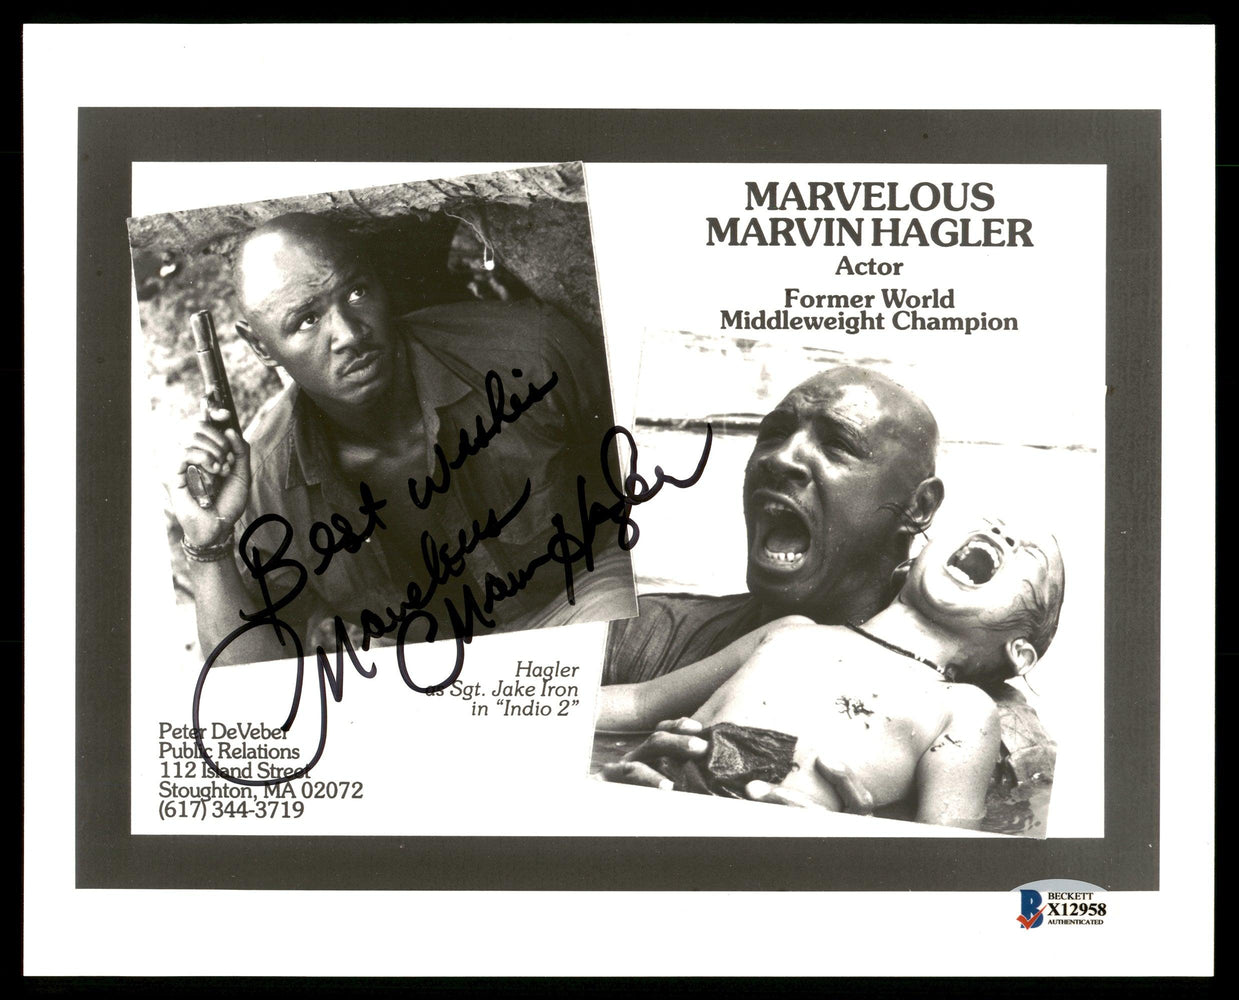 Marvelous Marvin Hagler Autographed 8x10 Photo "Best Wishes" Beckett BAS #X12958 - RSA